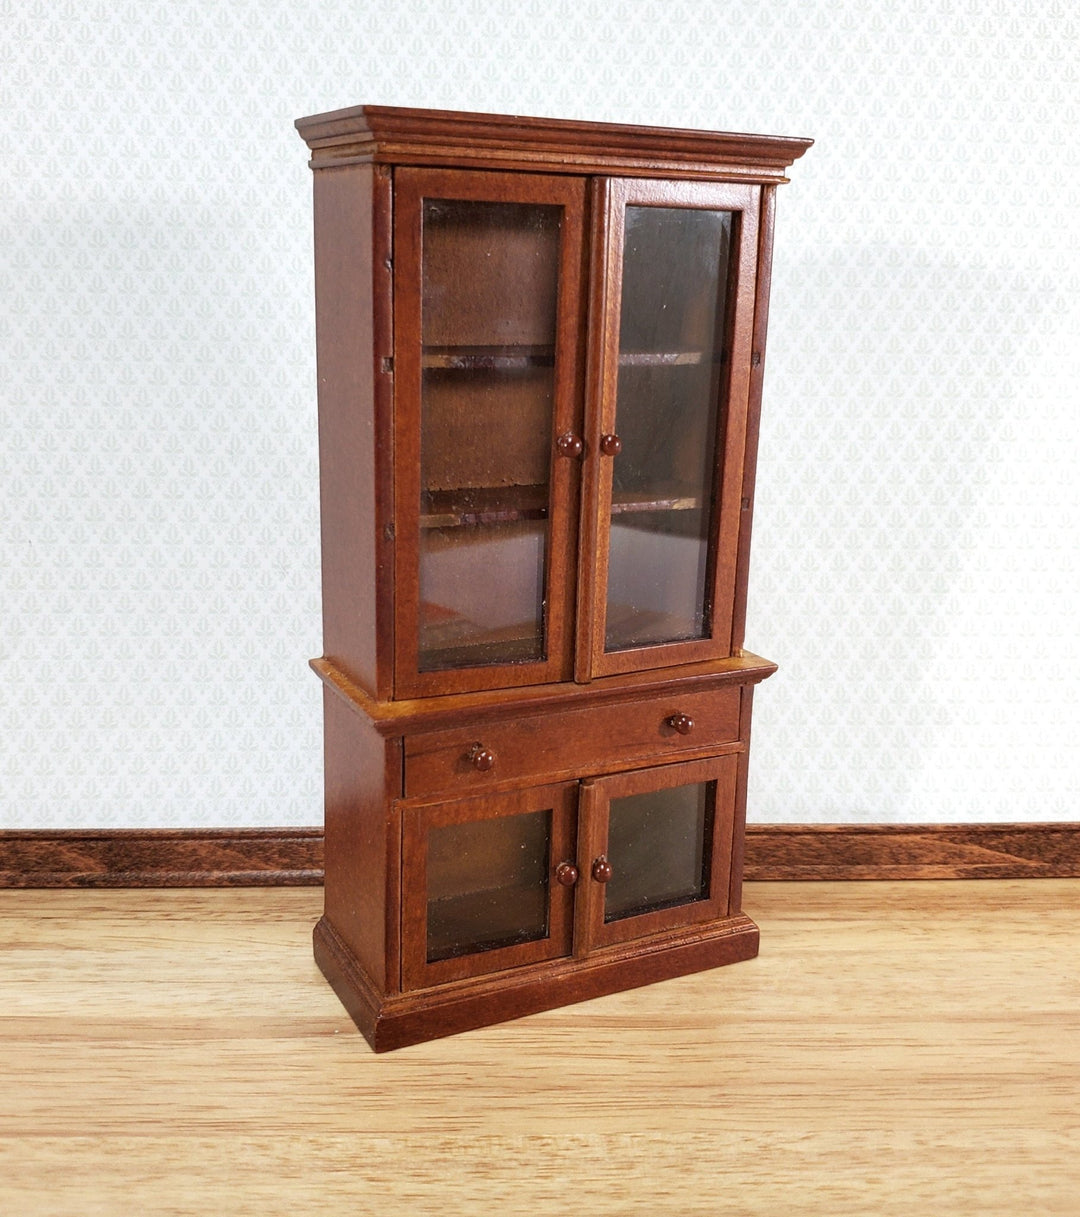 Dollhouse Bookcase Display Cabinet Hutch with Doors Walnut Finish 1:12 Scale Furniture - Miniature Crush